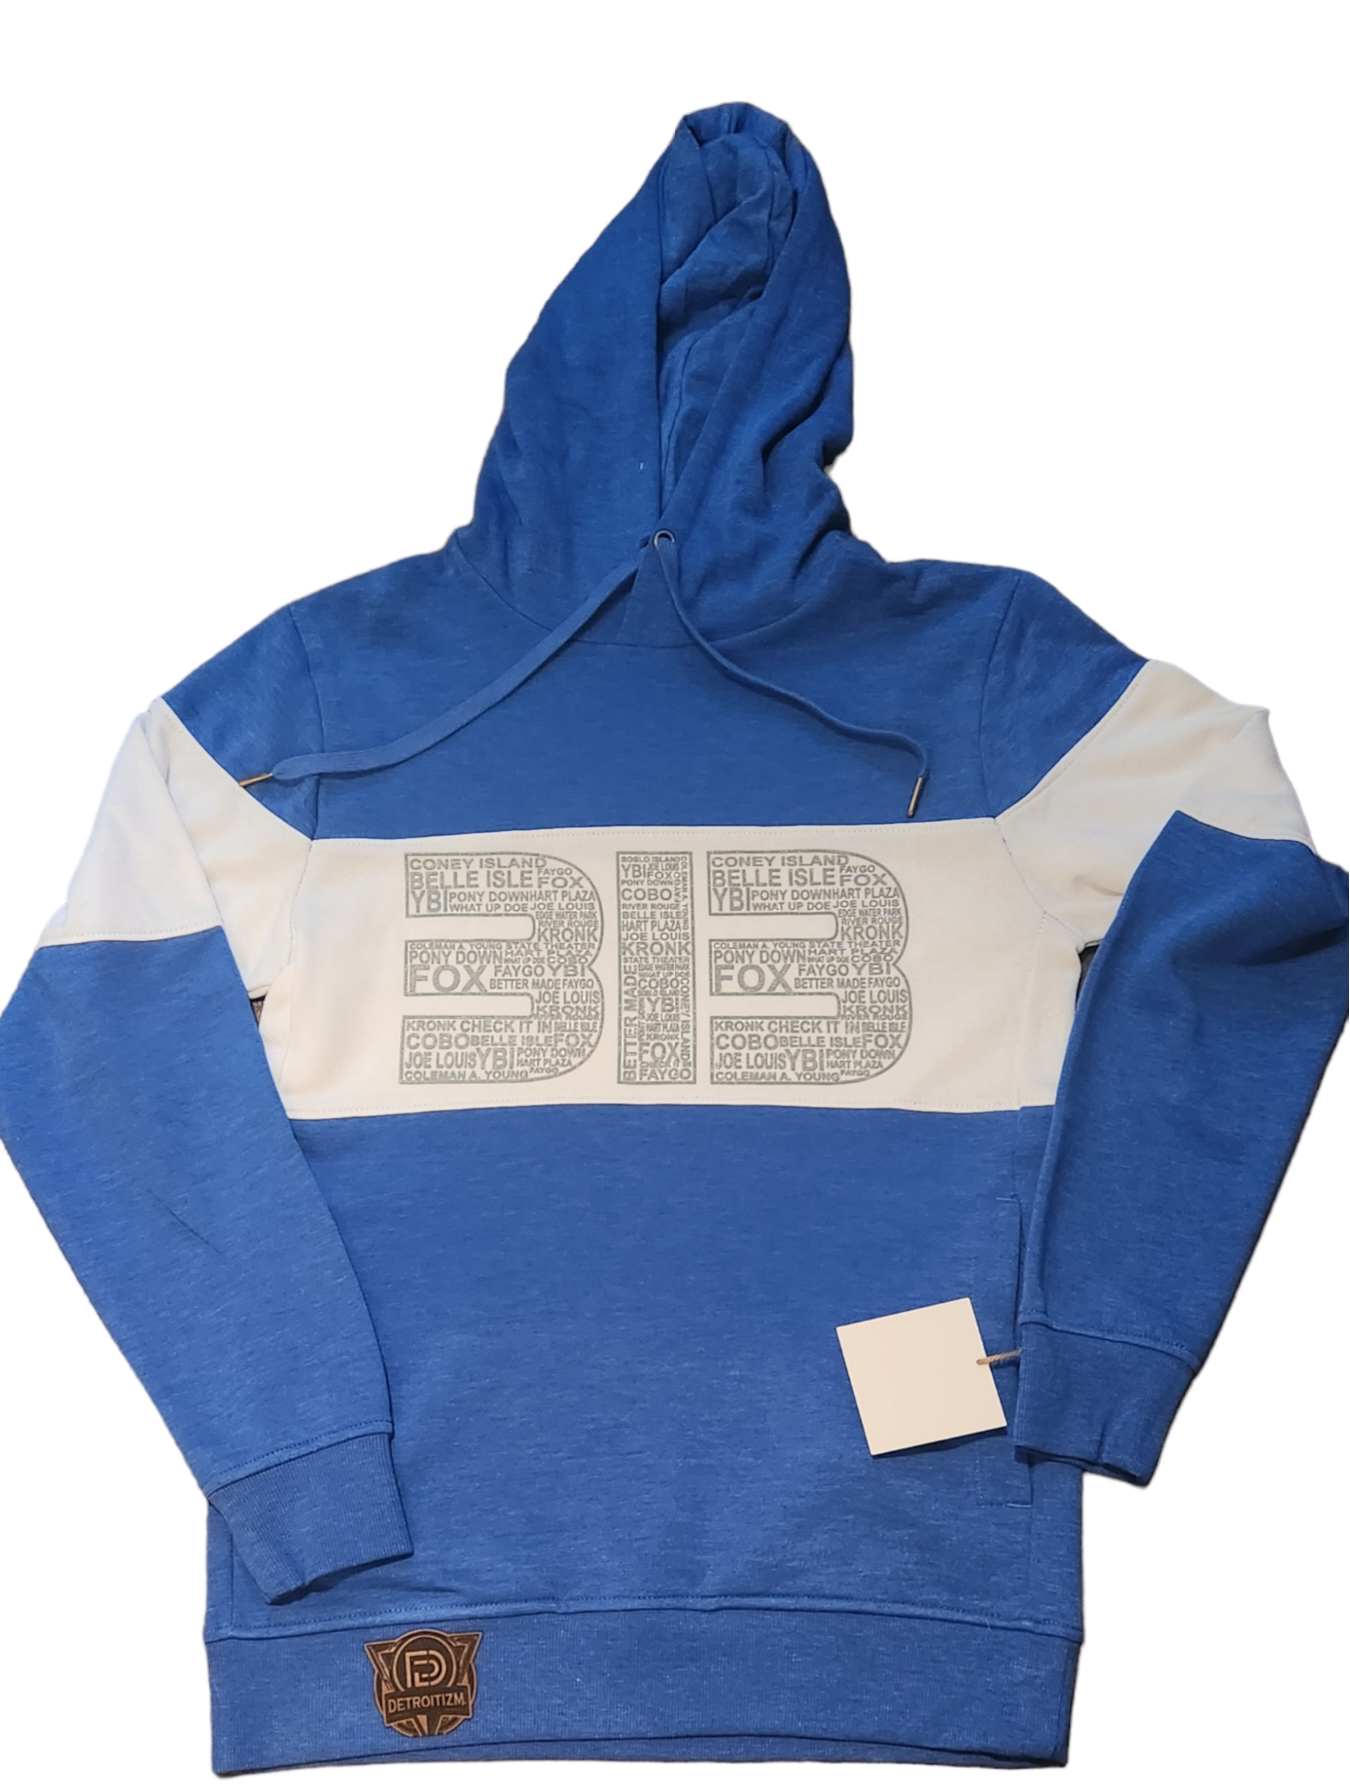 Iconic 313 Ivy League Royal Hoodie